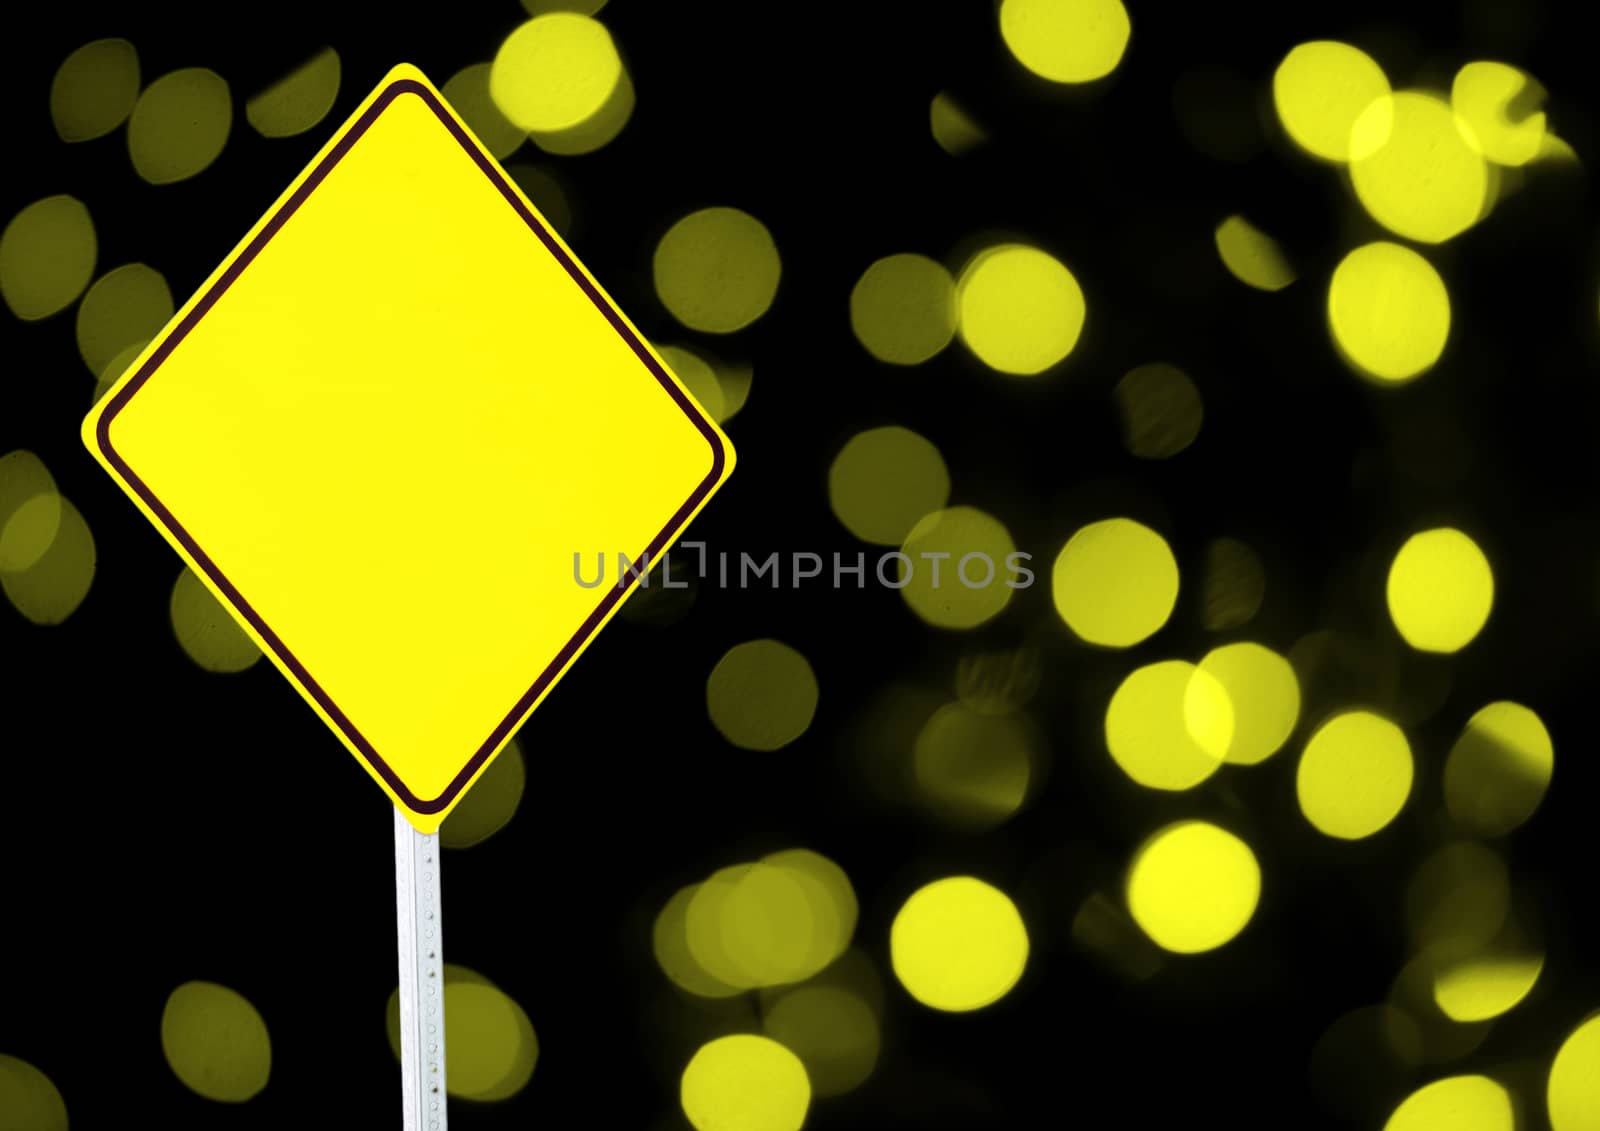 empty warning sign with abstract yellow lights background